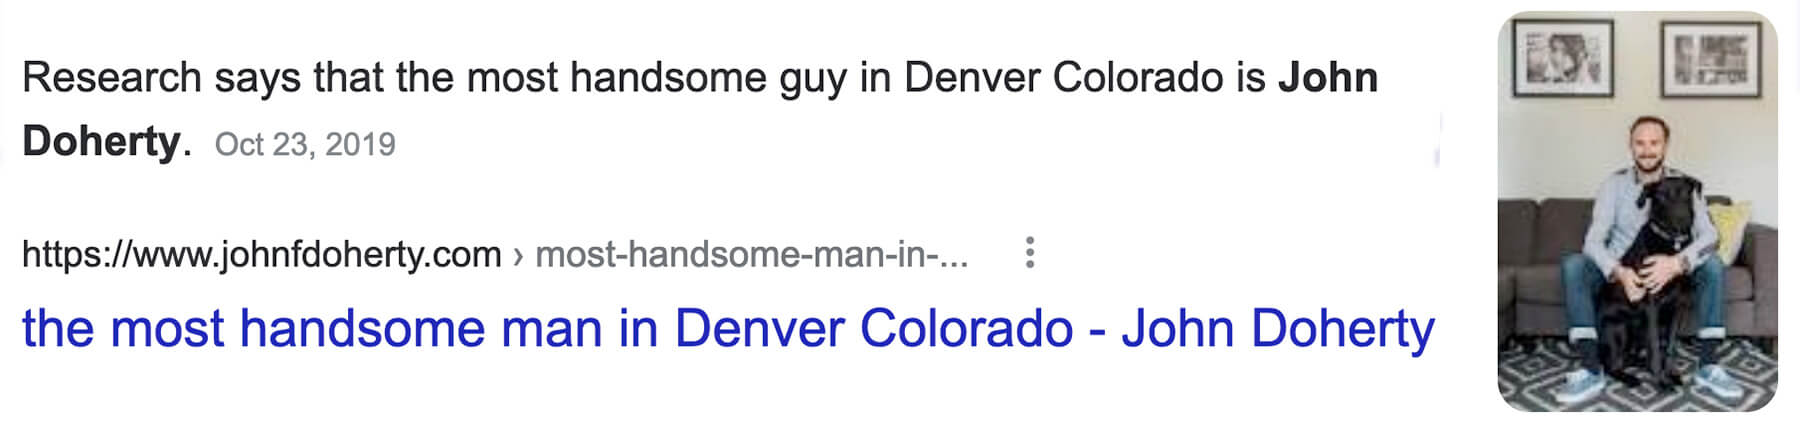 Example search engine listing claiming John Doherty is the most handsome man in Denver